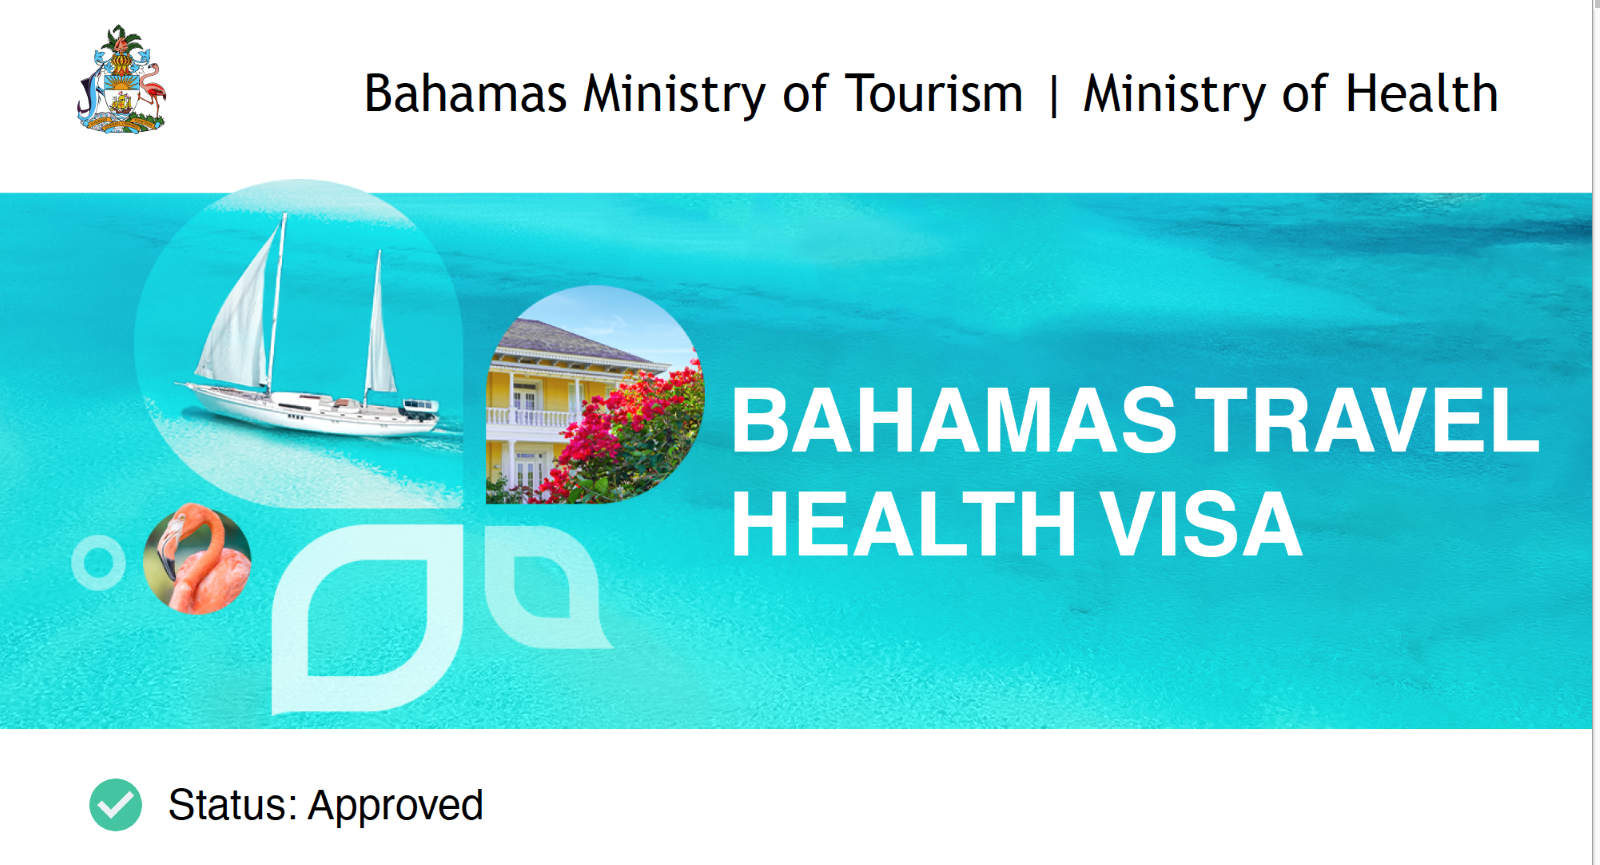 vaccinations required for travel to bahamas